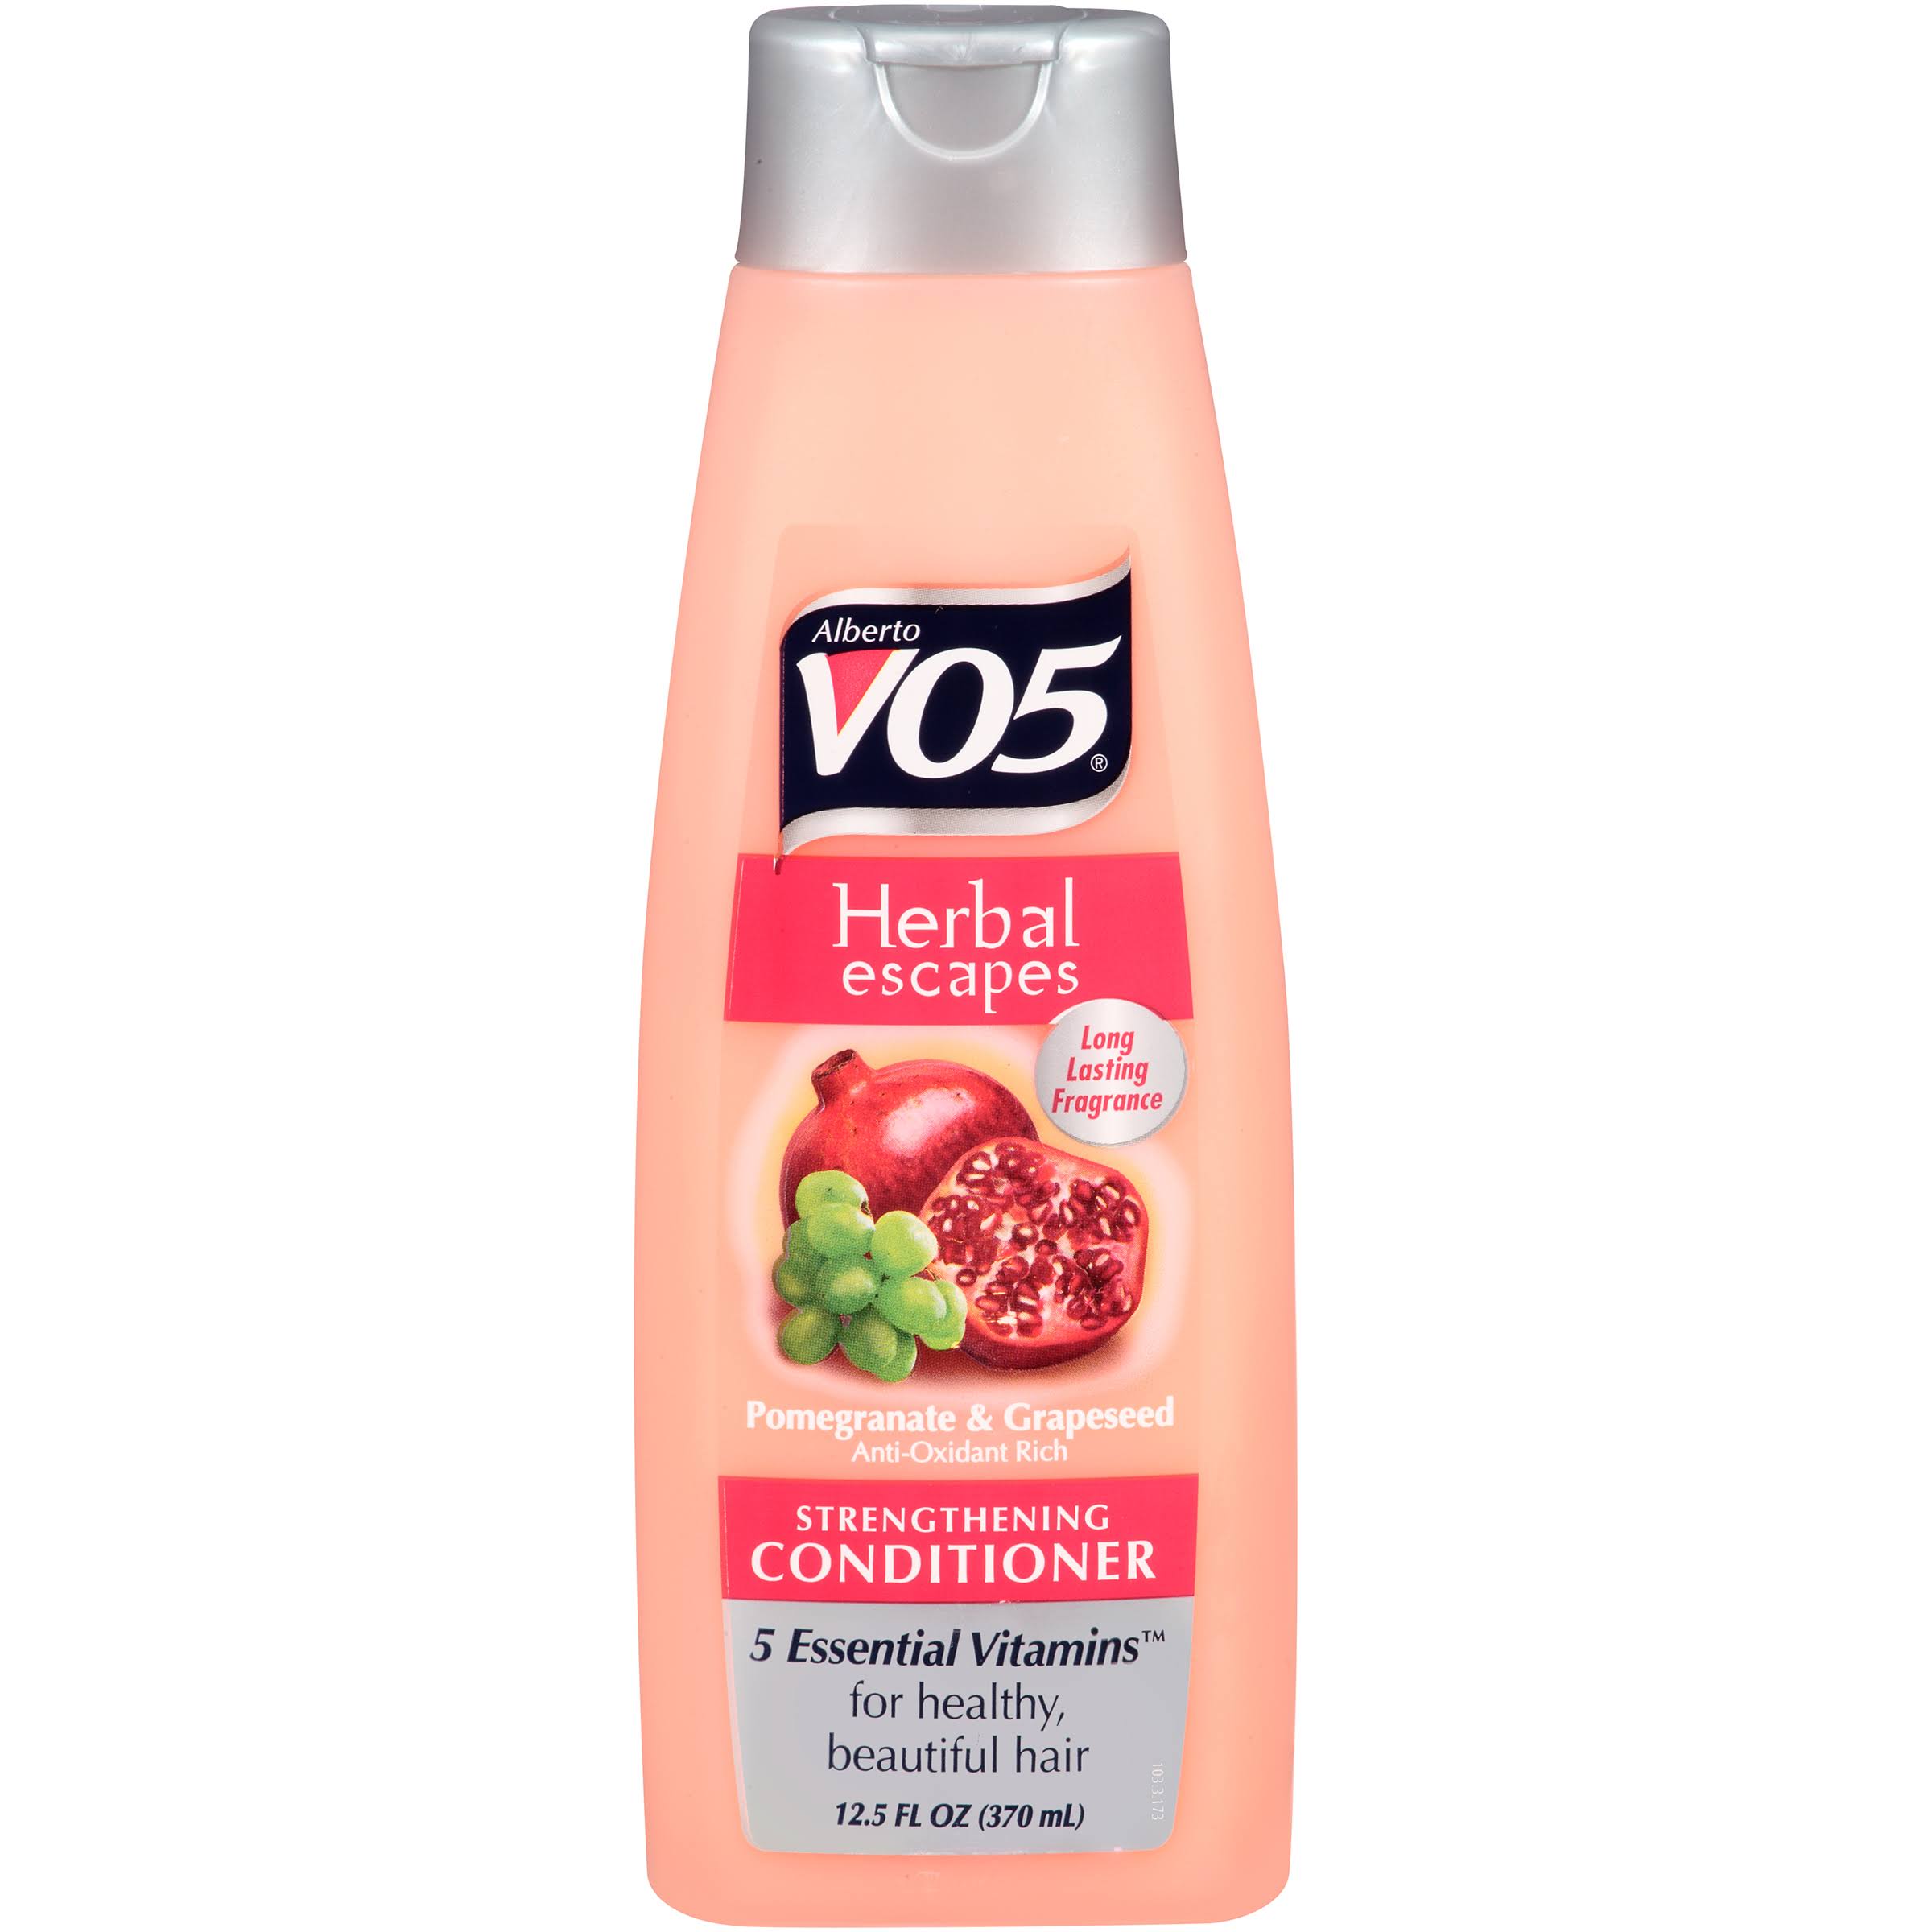 Alberto Vo5 Herbal Escapes Strengthening Conditioner - Pomegranate and Grapeseed, 12.5oz